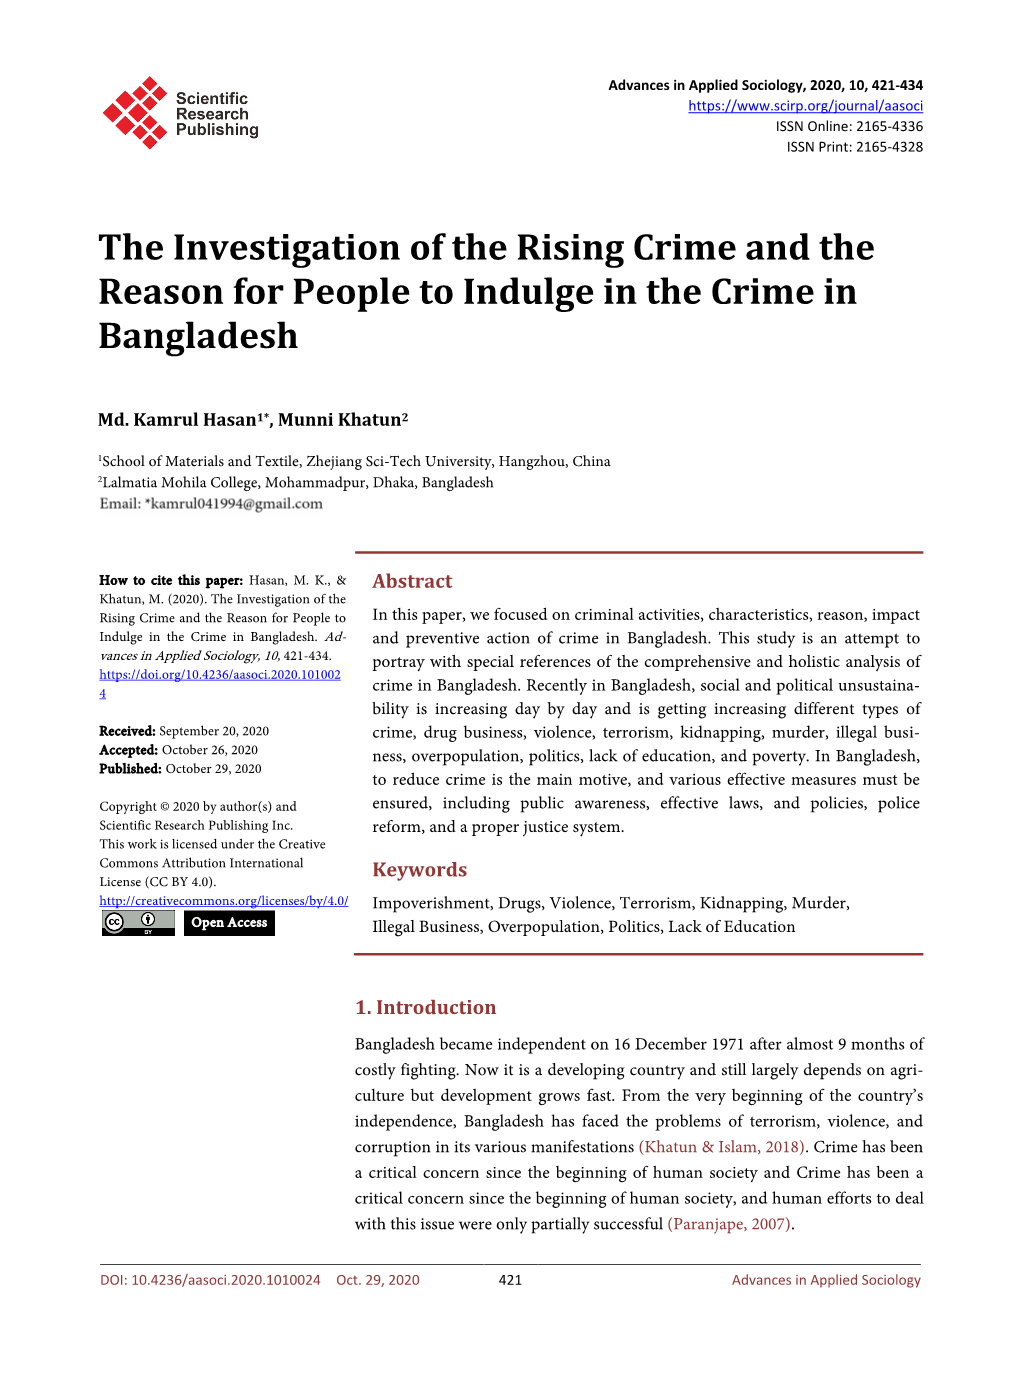 The Investigation of the Rising Crime and the Reason for People to Indulge in the Crime in Bangladesh